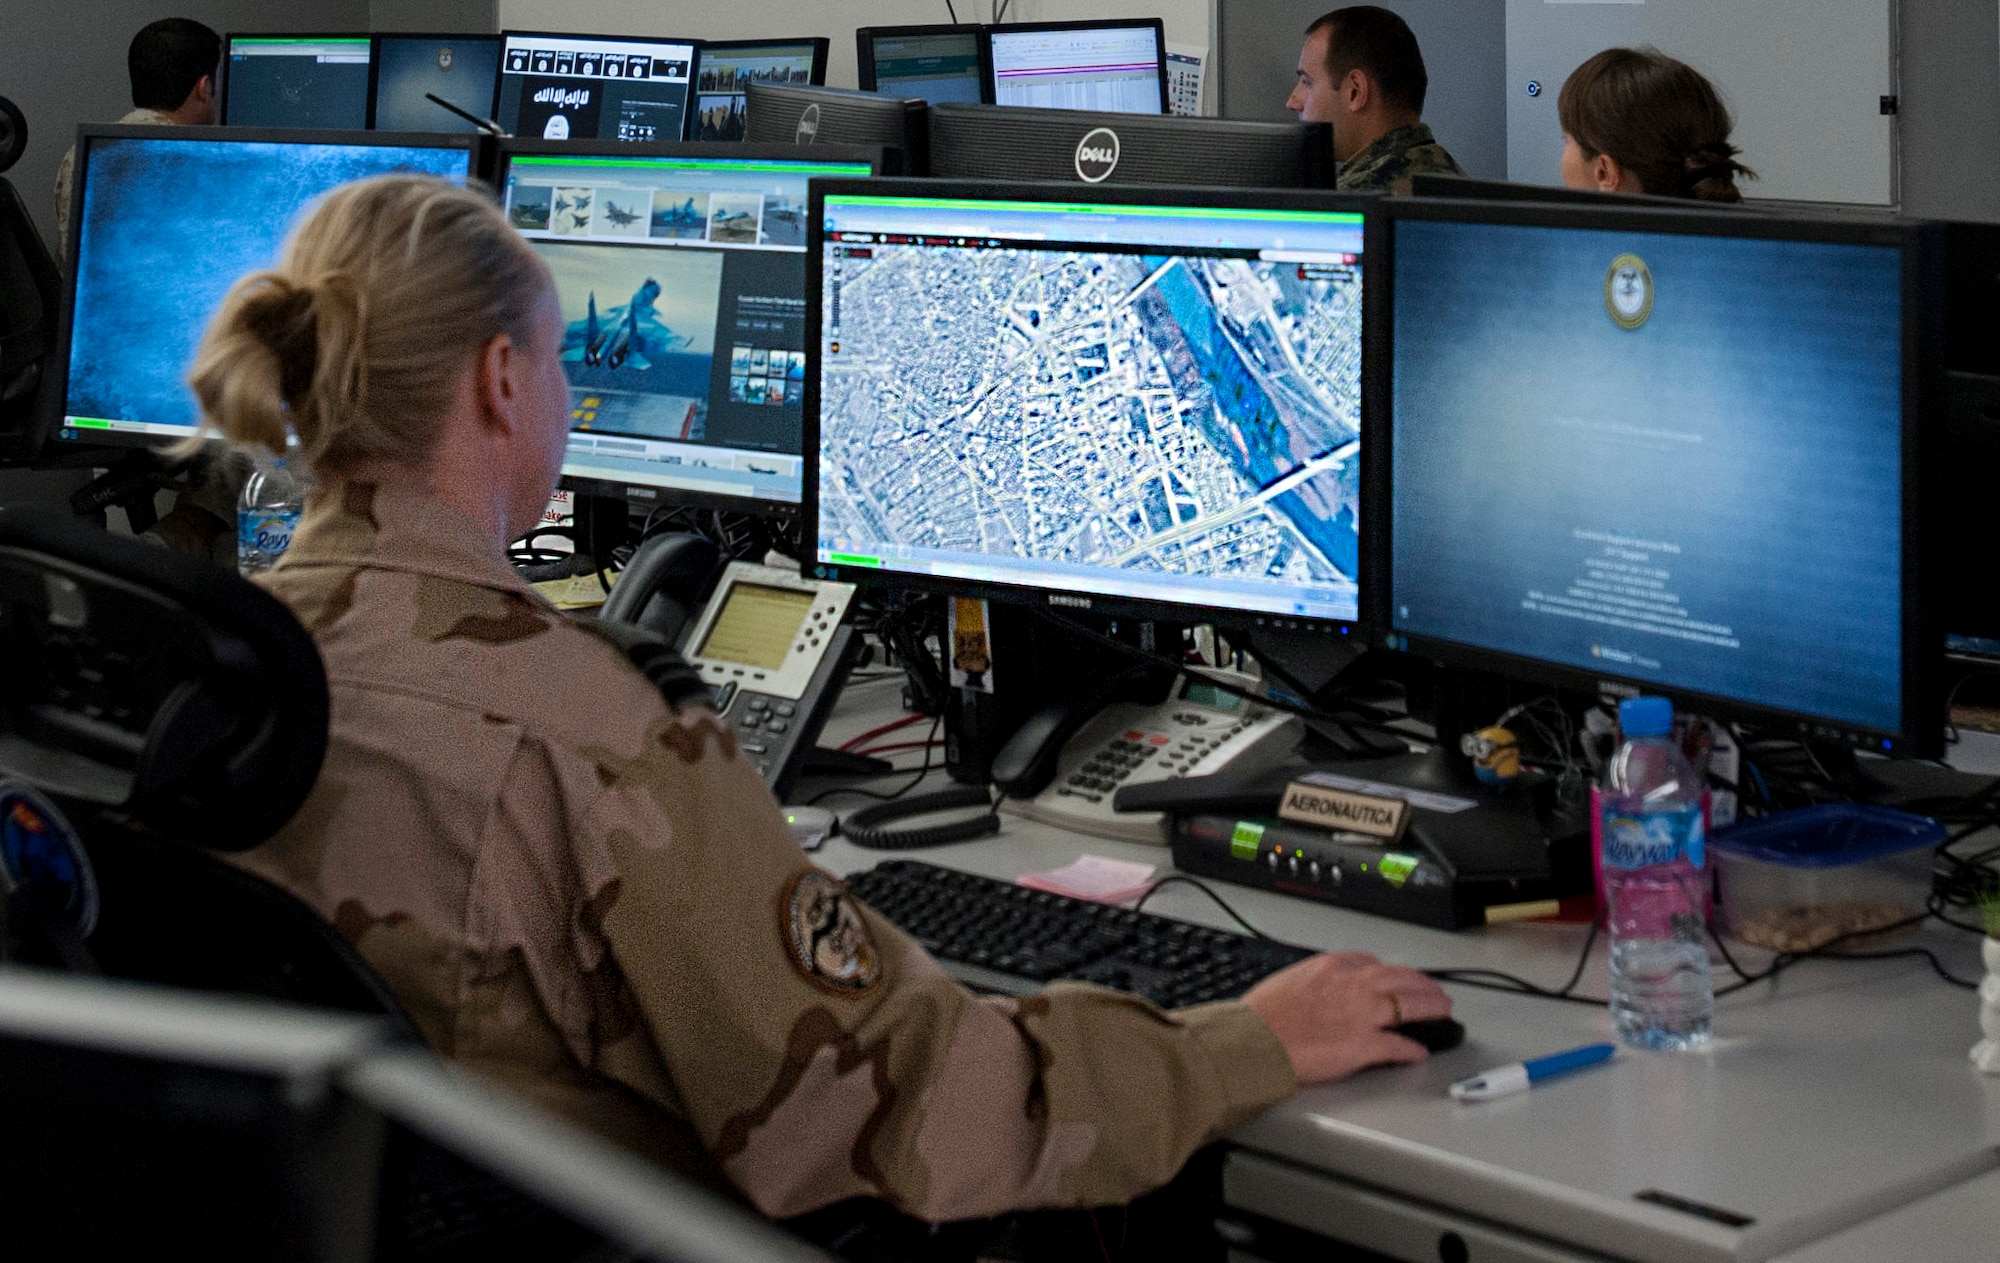 A U.S. Coalition Intelligence Fusion Cell member reviews a map at the Combined Air and Space Operations Center Nov. 16, 2016, at Al Udeid Air Base, Qatar. The CIFC is a diverse multinational team that plans, coordinates, develops and disseminates timely, relevant and accurate information among international partners and divisions within the CAOC. (U.S. Air Force photo by Staff Sgt. R. Alex Durbin)